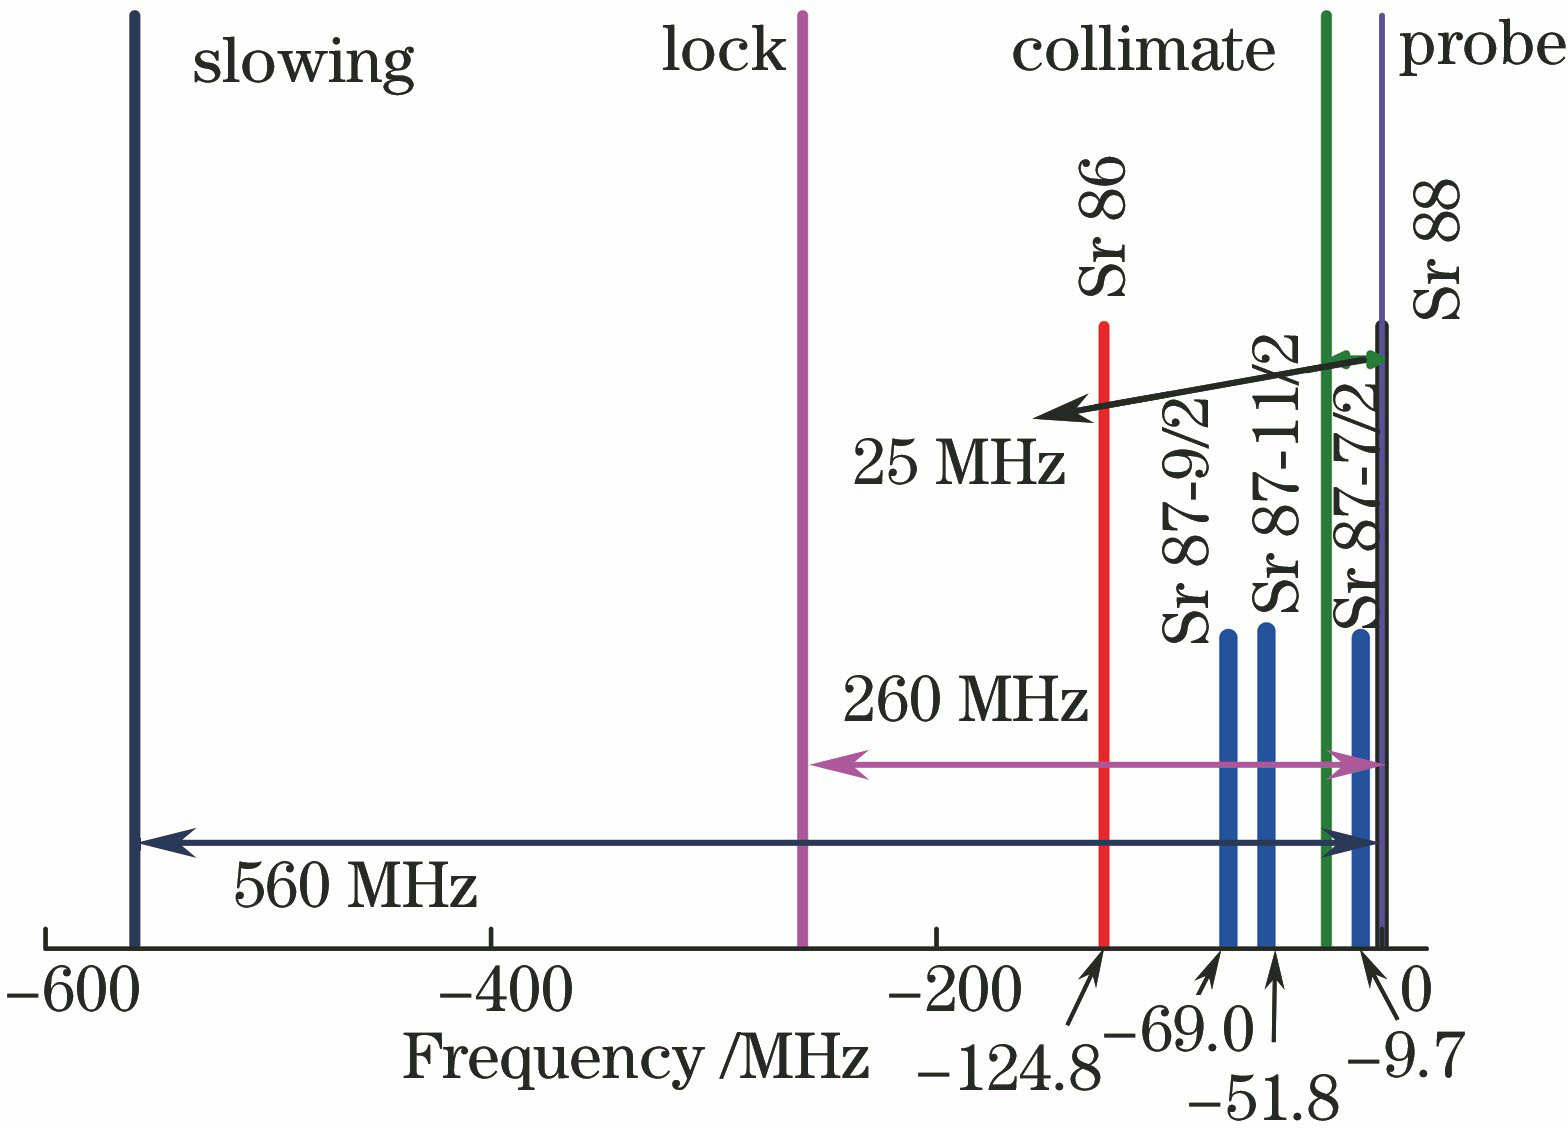 (5s2)1S0→(5s5p)1P1 transition frequencies of each isotope and each laser frequency shift